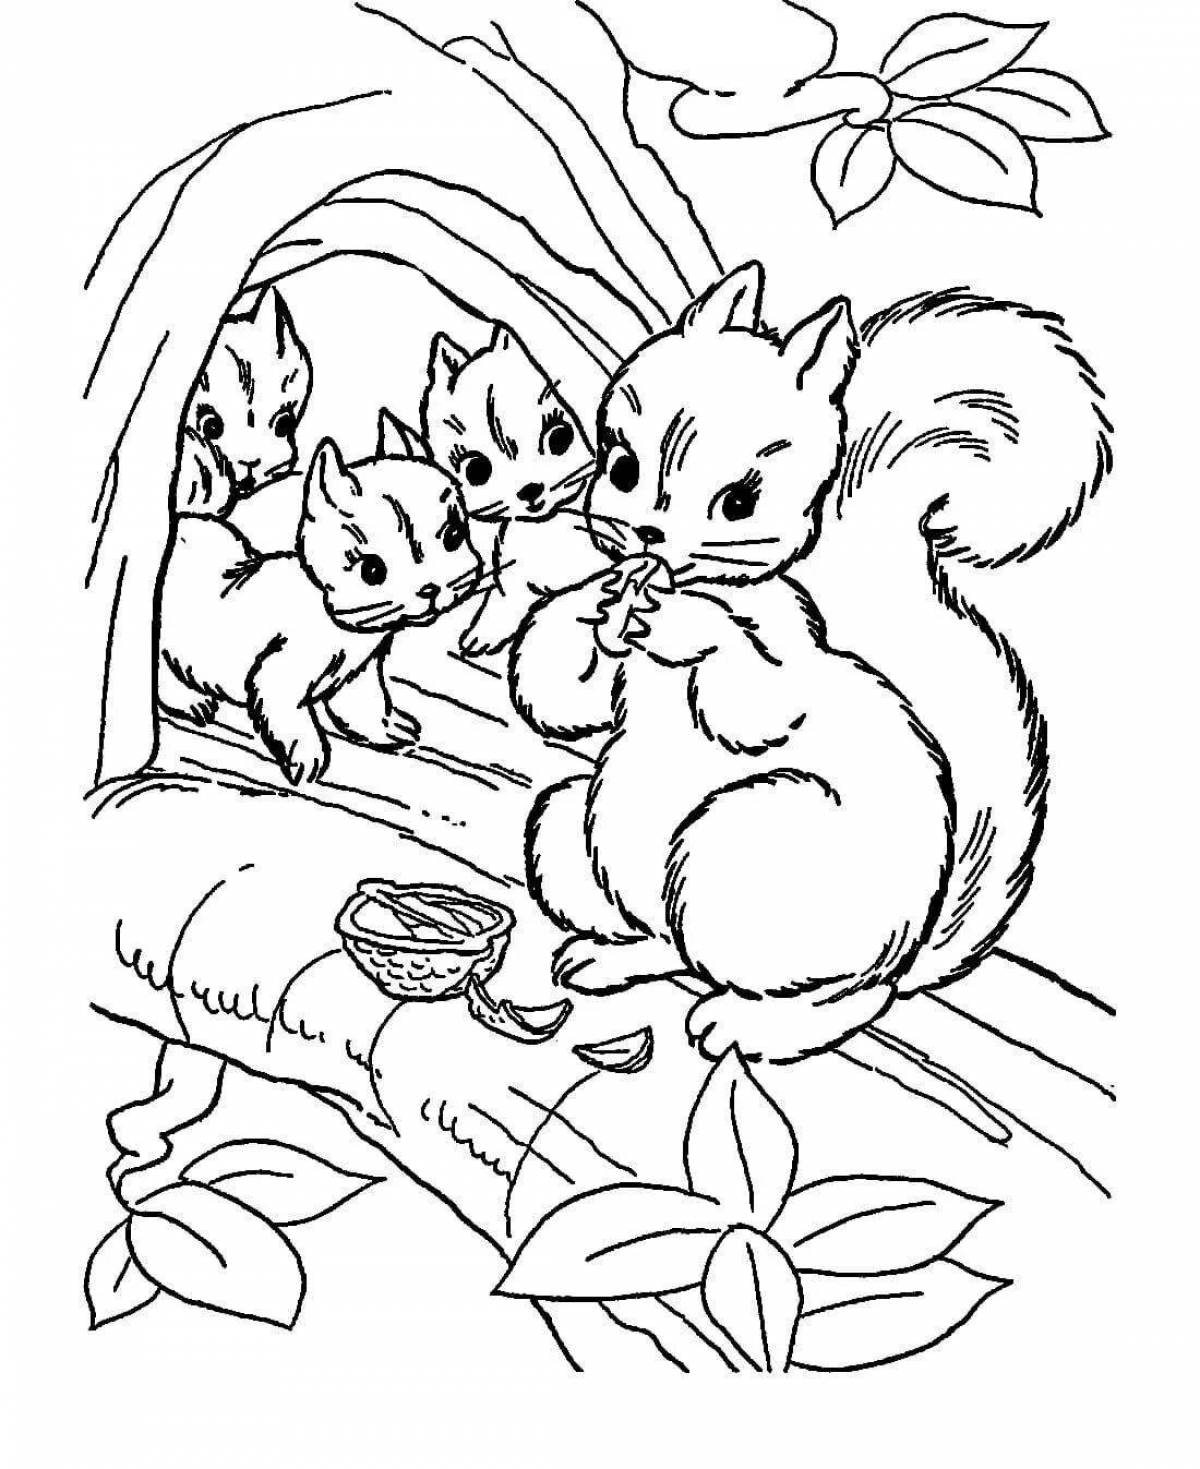 Funny squirrel coloring pages